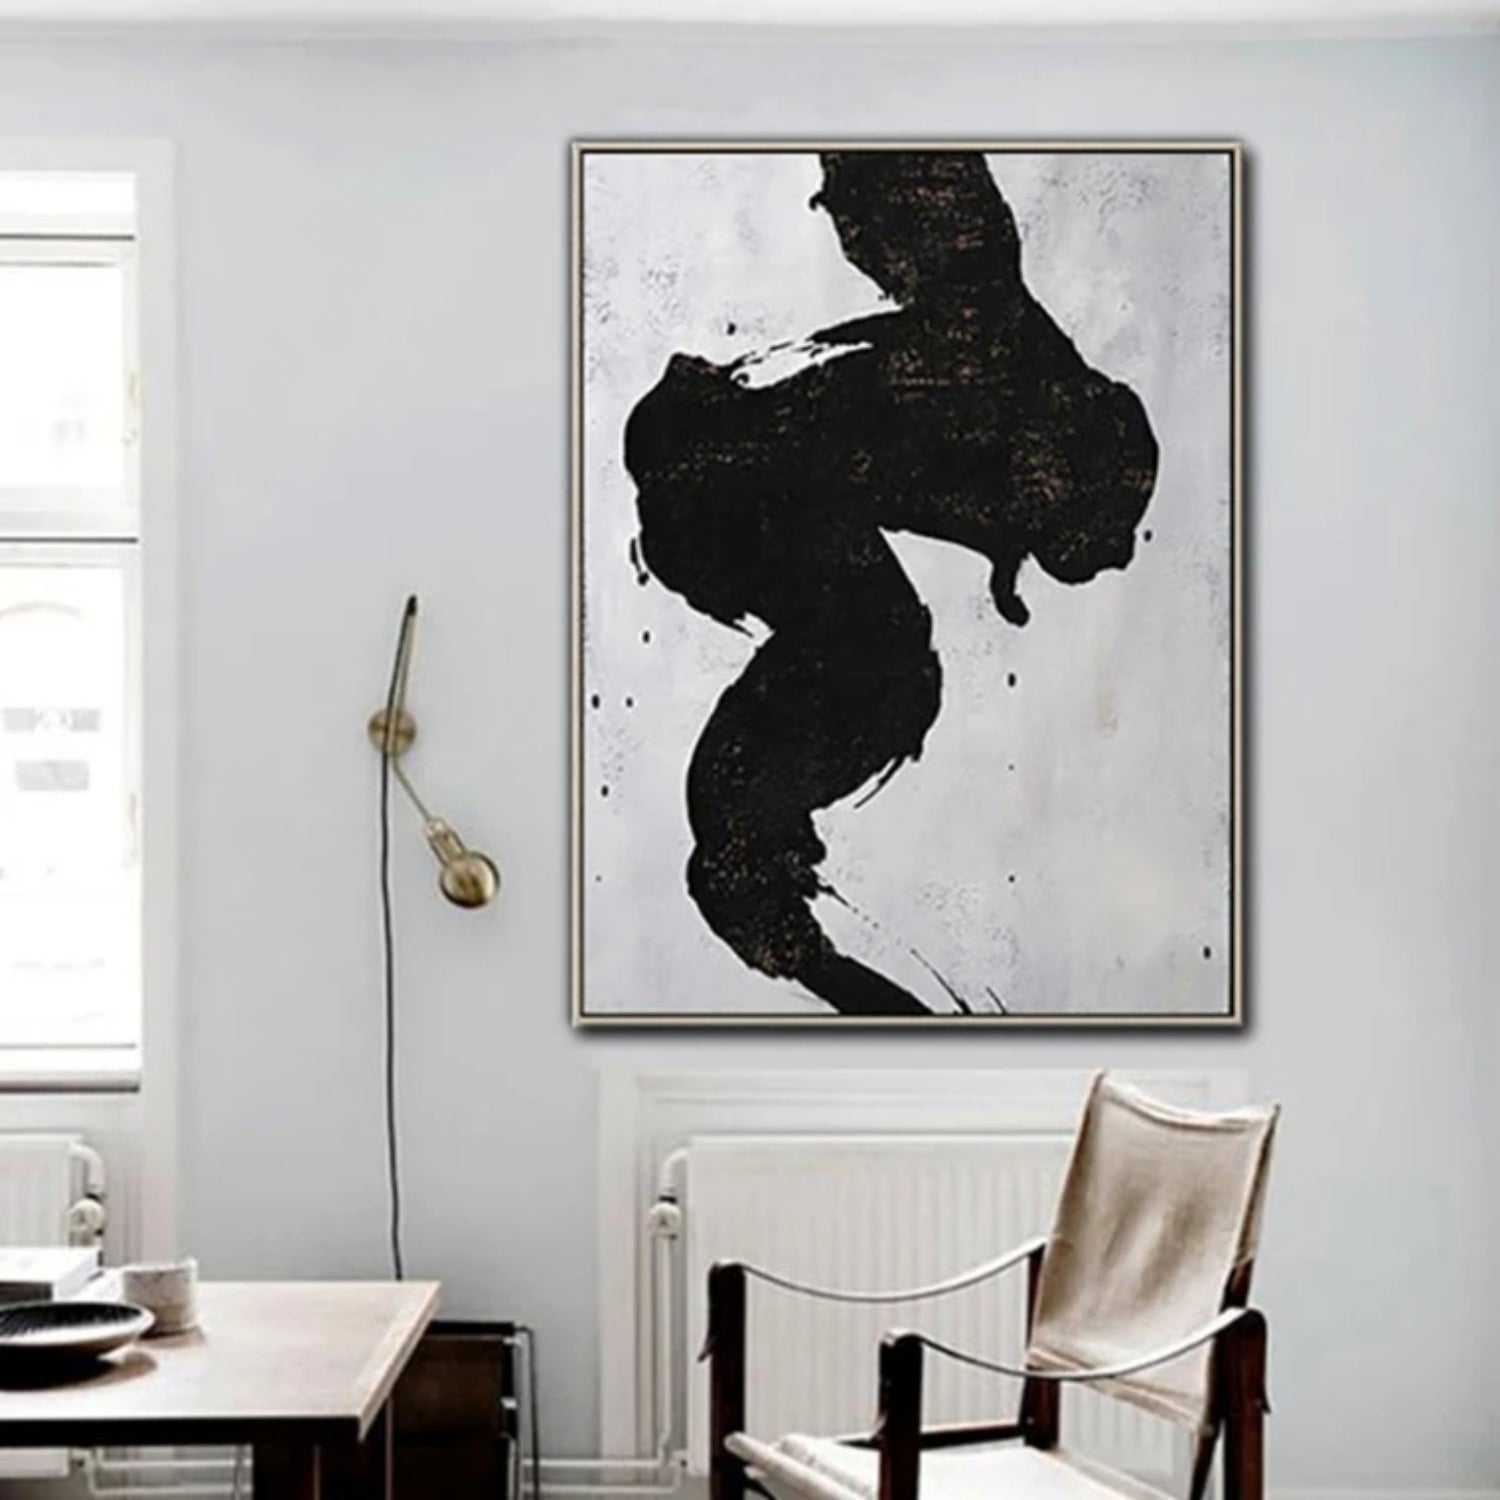 Vertical Black and White Minimalist Wall Painting